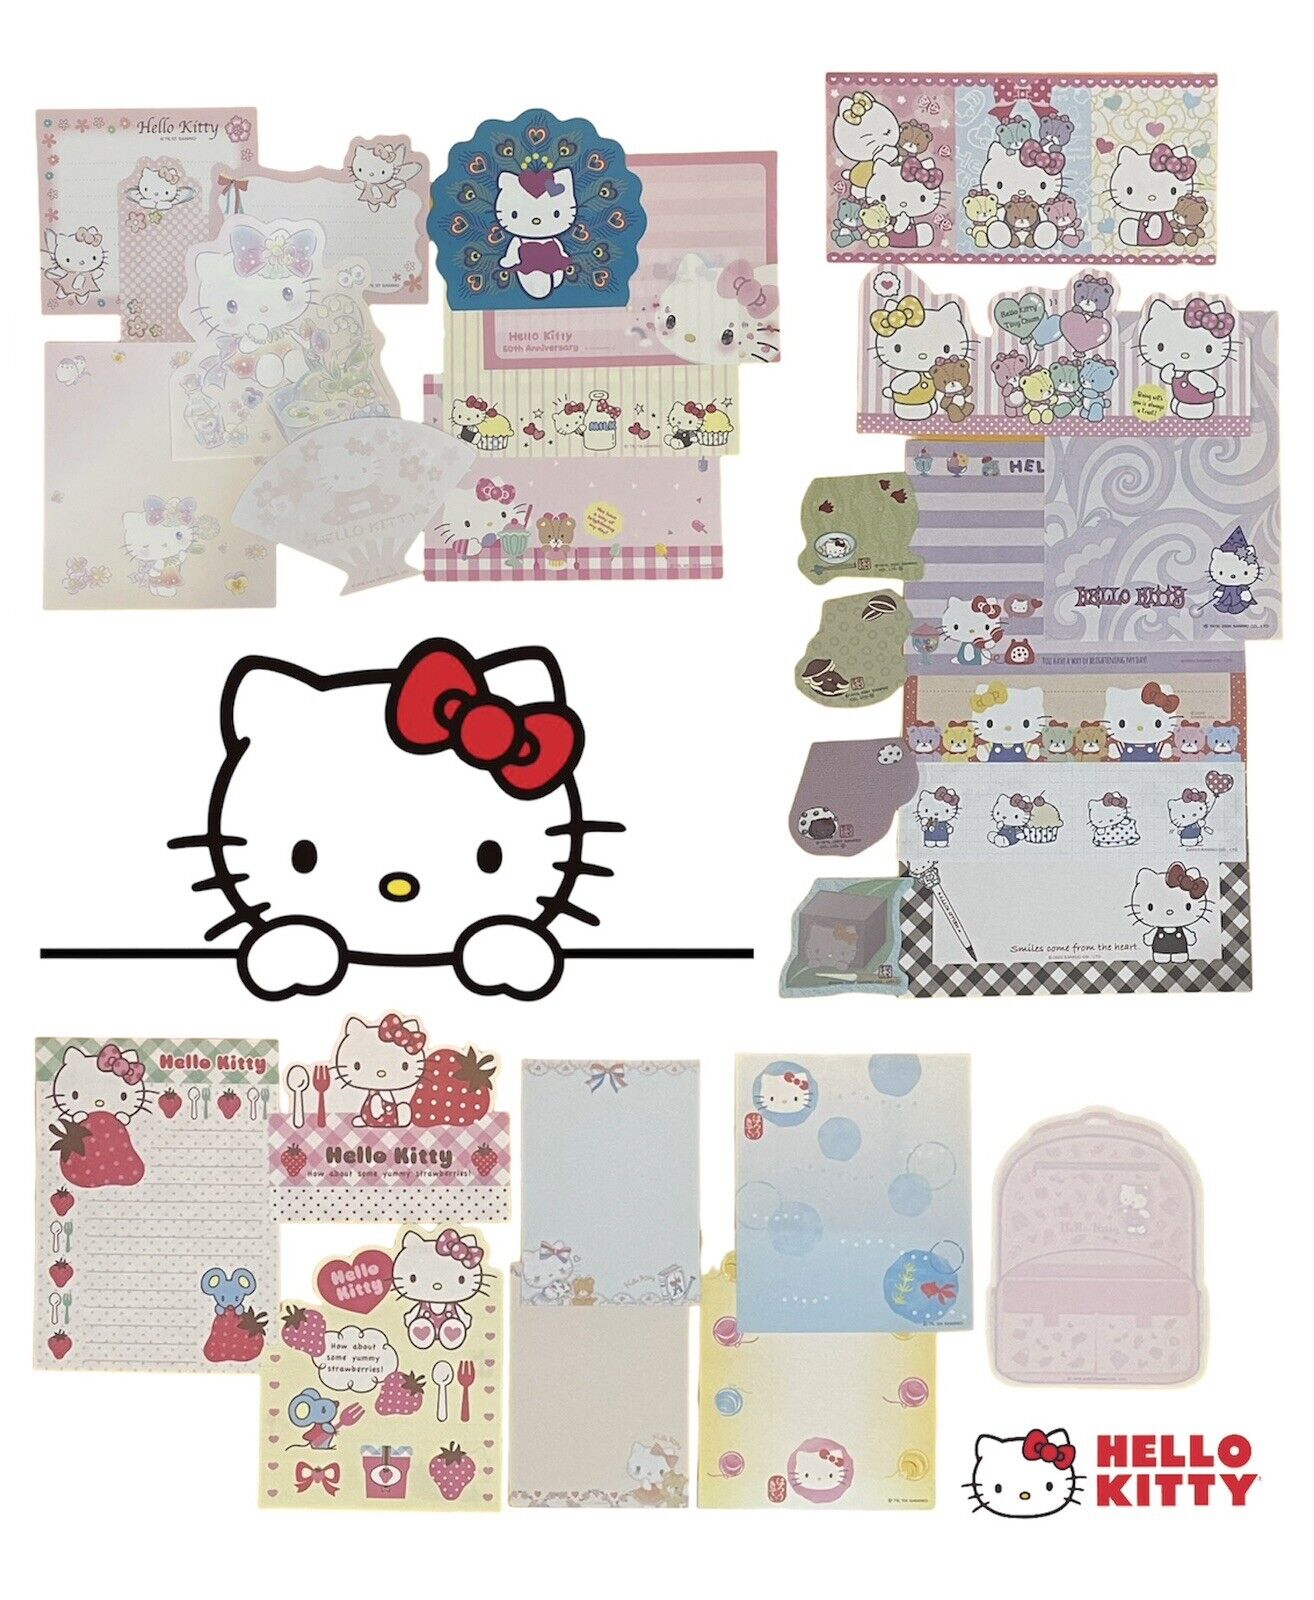 Sanrio Hello Kitty Stationery Lot Memo Notepad Note Paper 30 Pages Retro Vintage